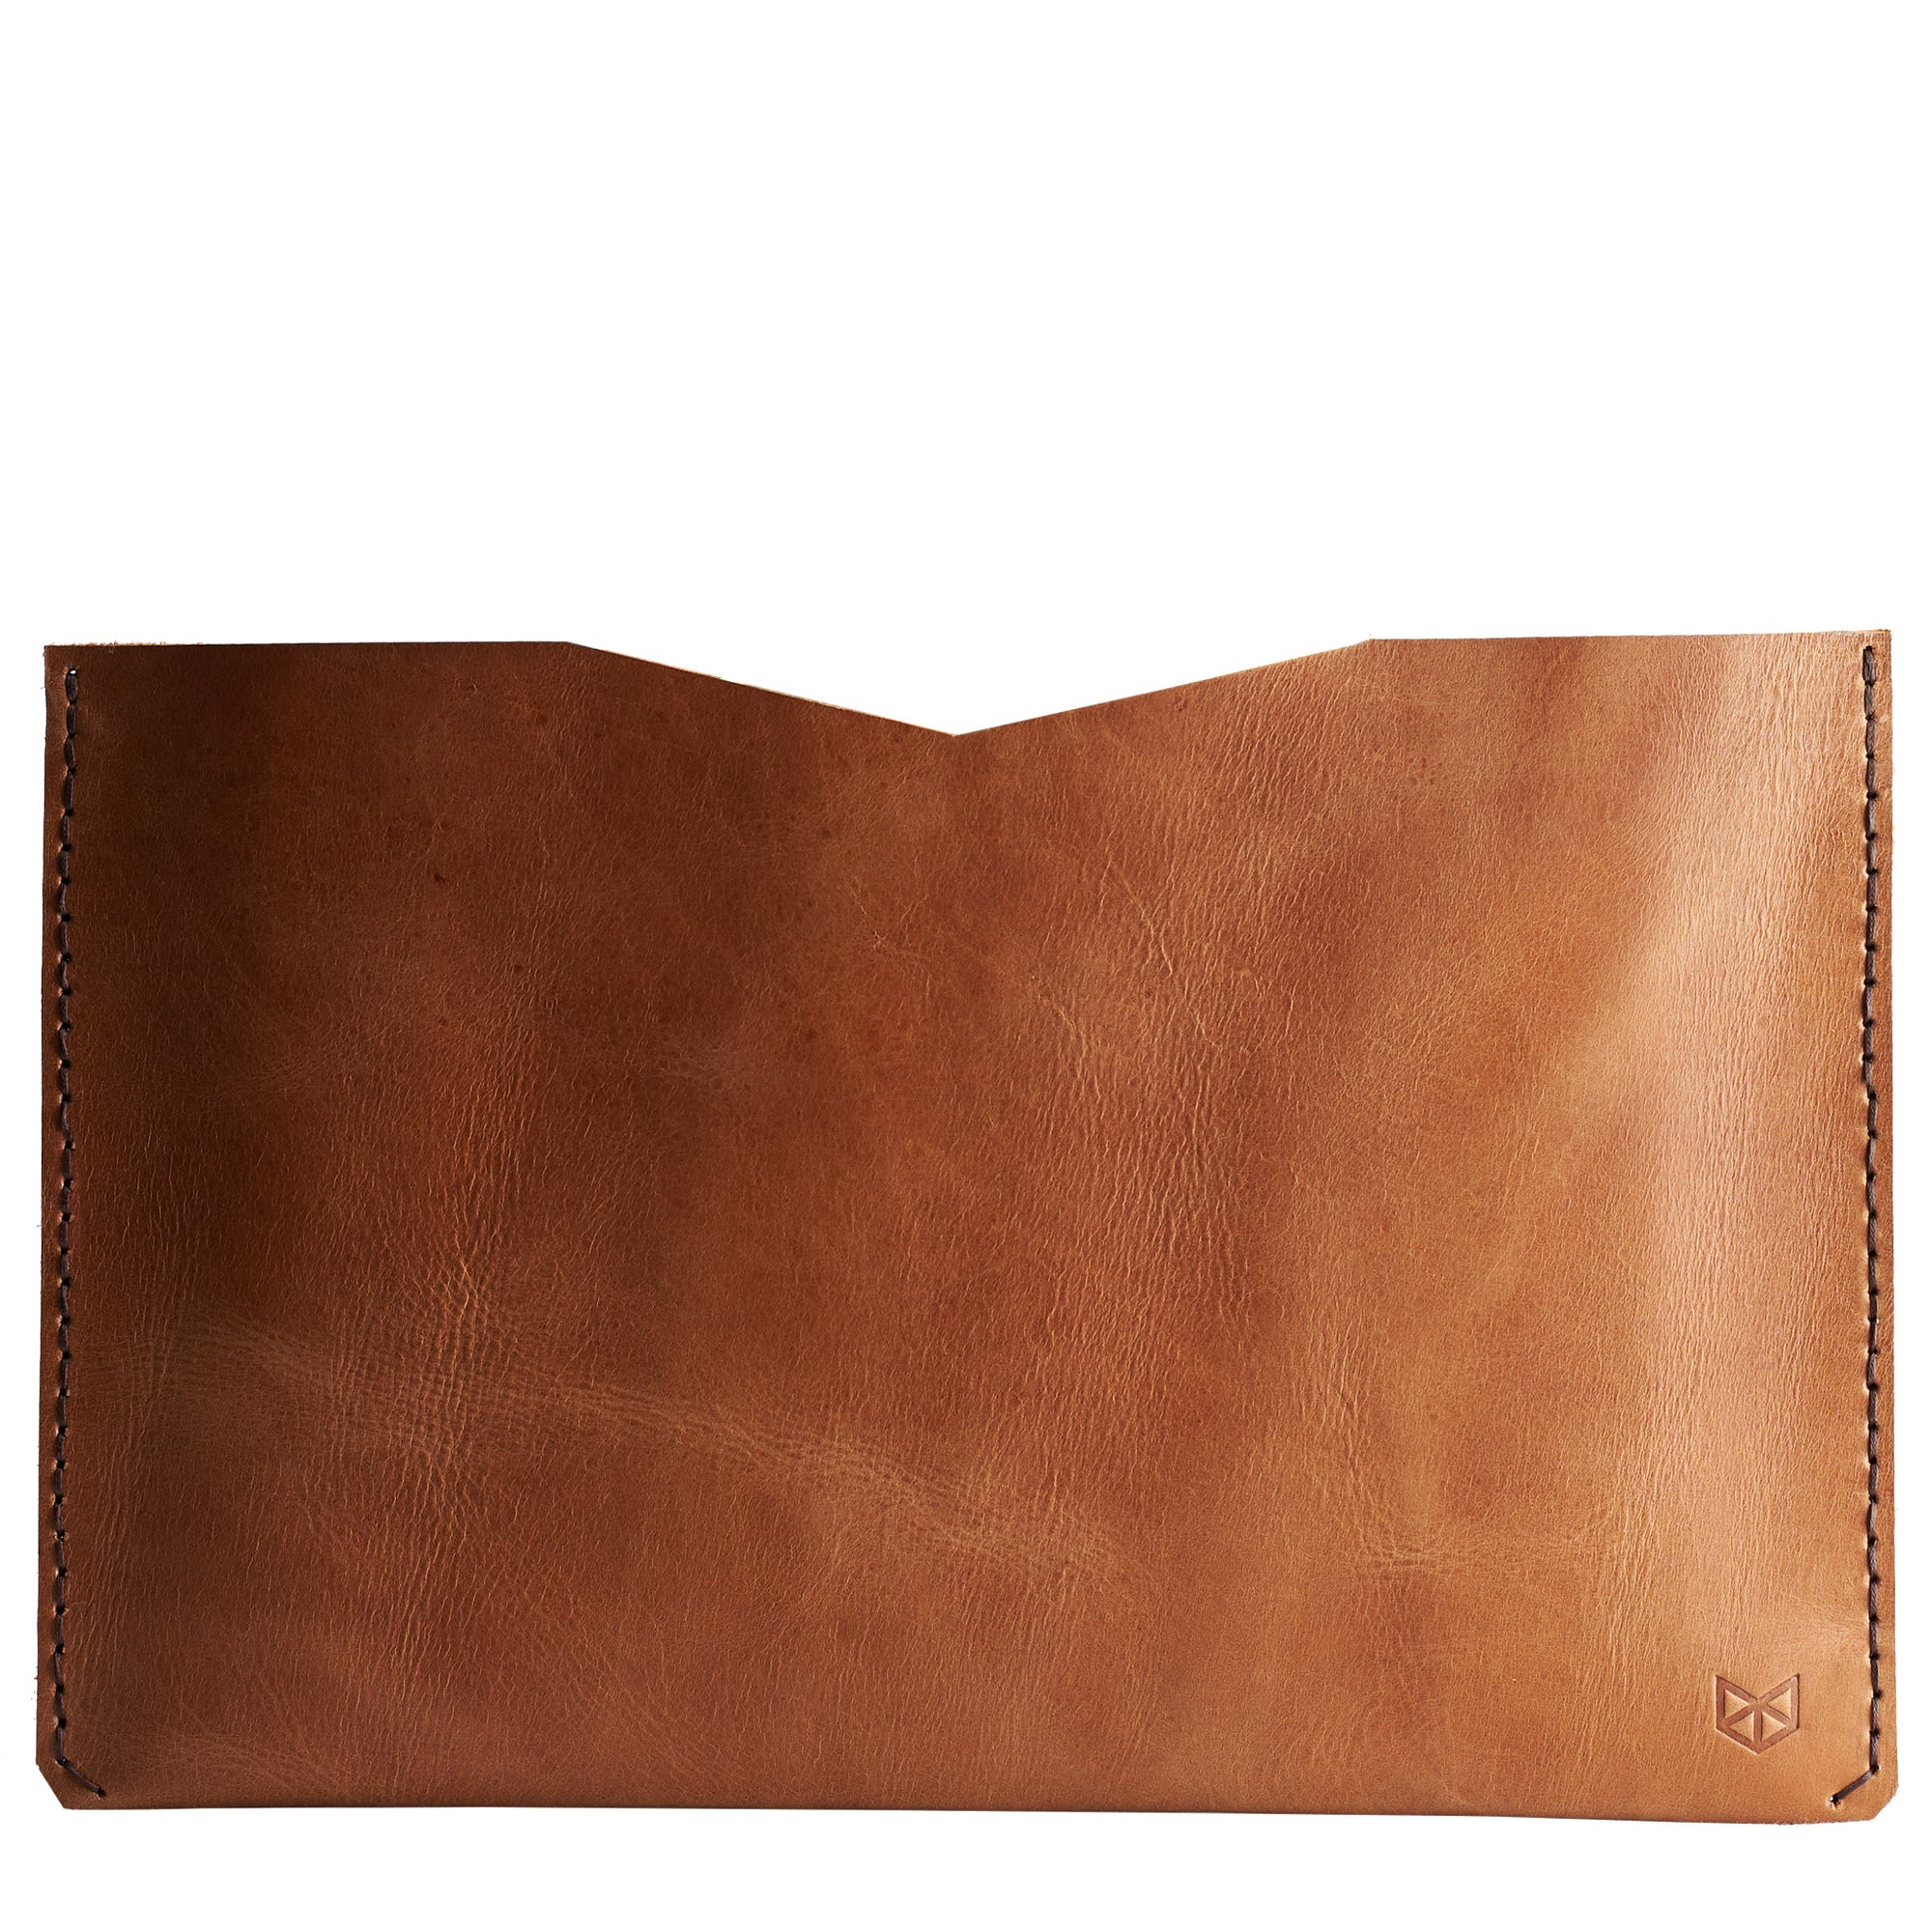 Dell XPS laptop inside leather sleeve